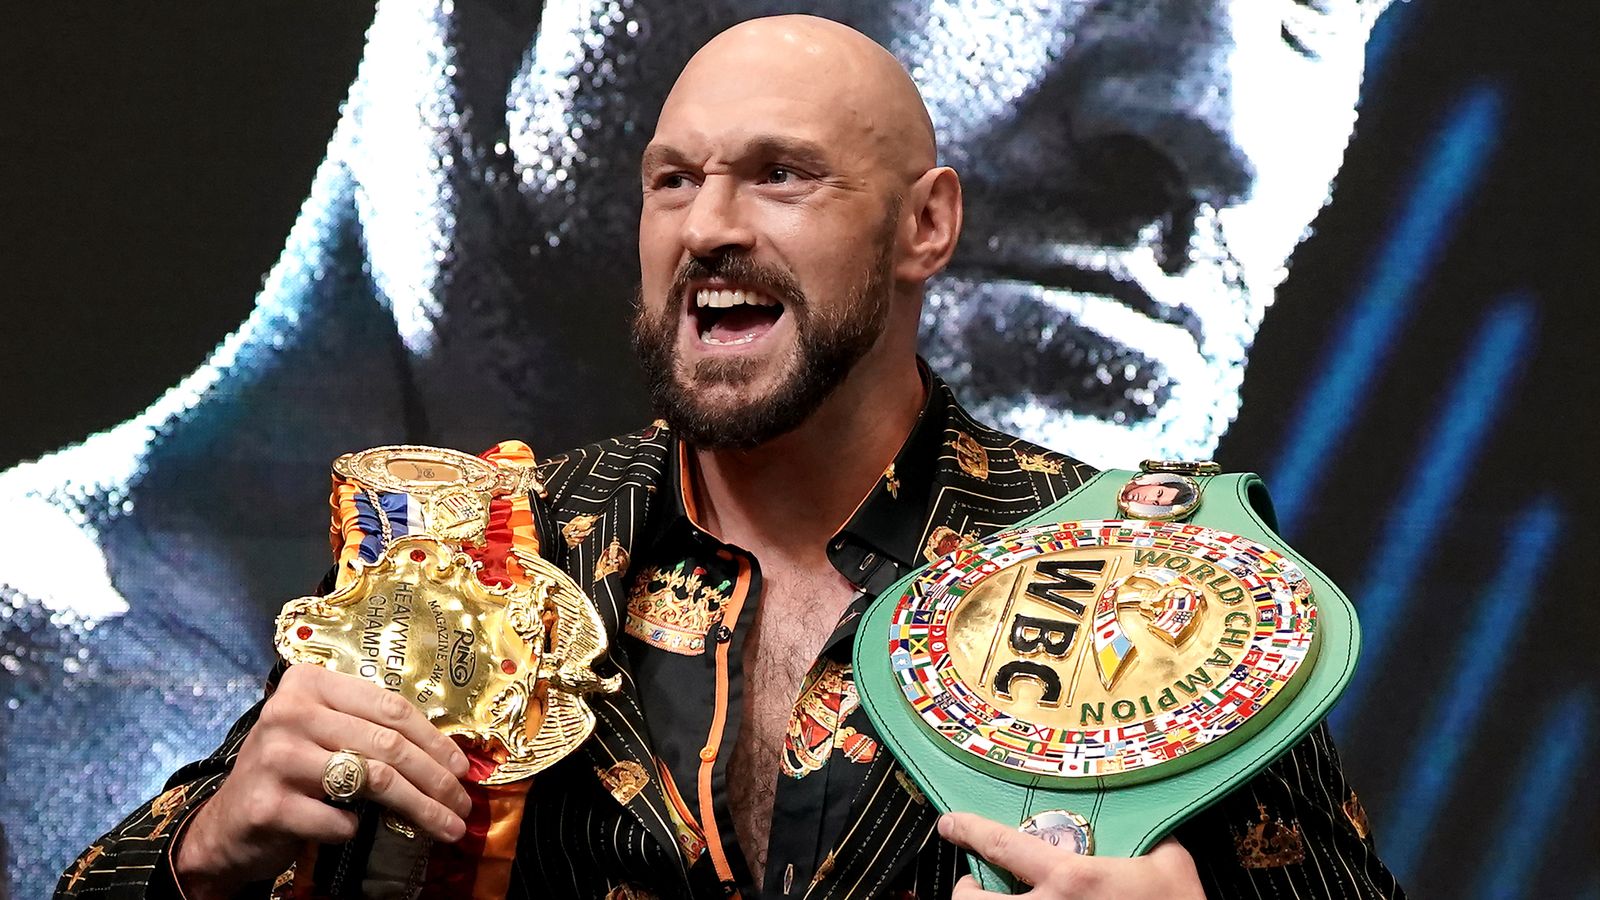 tyson-fury-informs-wbc-he-will-resume-his-boxing-career-or-oleksandr-usyk-undisputed-clash-remains-on-course